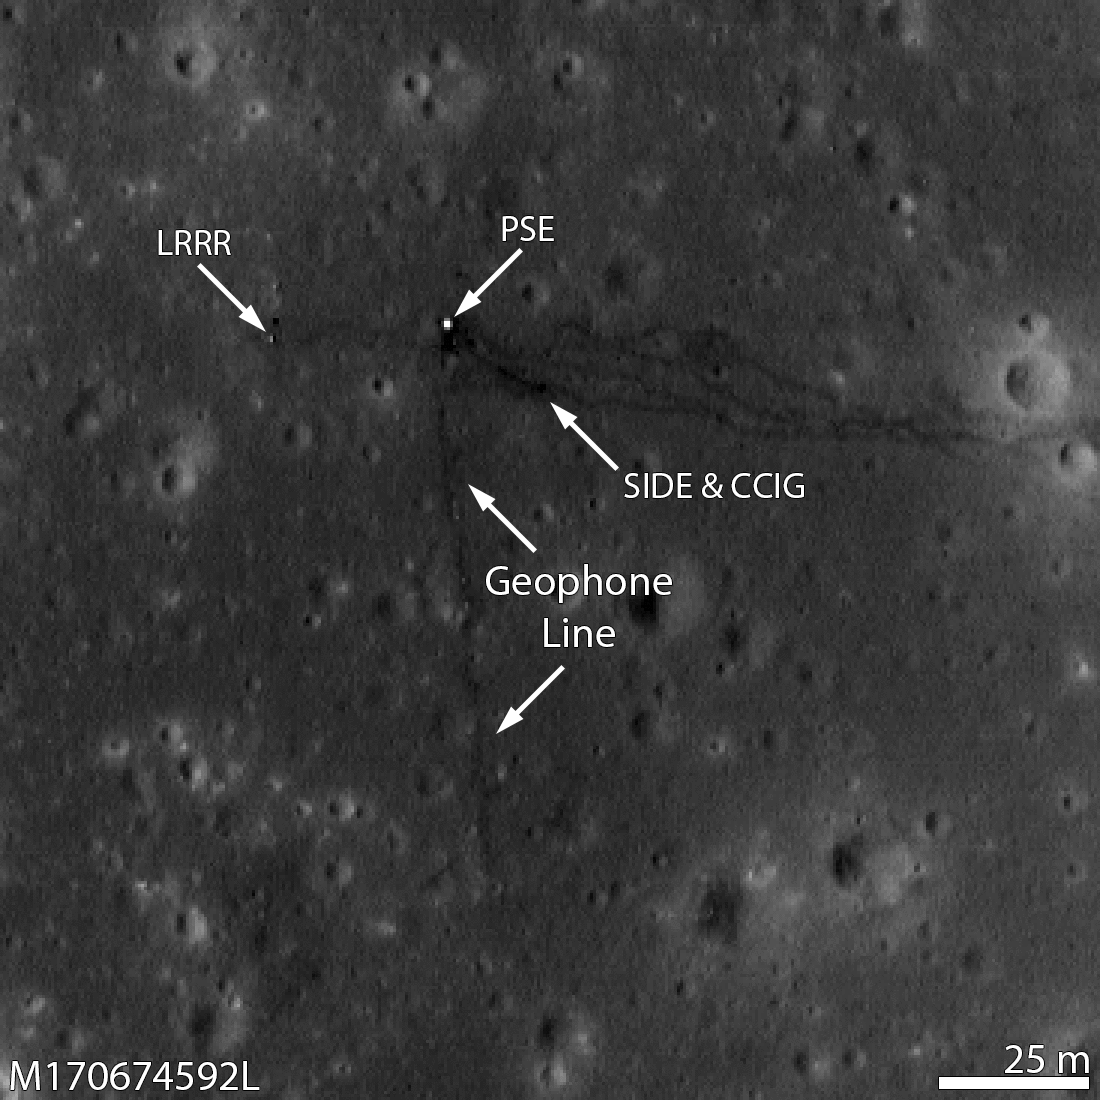 LROC NAC time-lapse of the Apollo 14 ALSEP site highlighting the LRRR, PSE, Geophone Line, SIDE and CCIG.